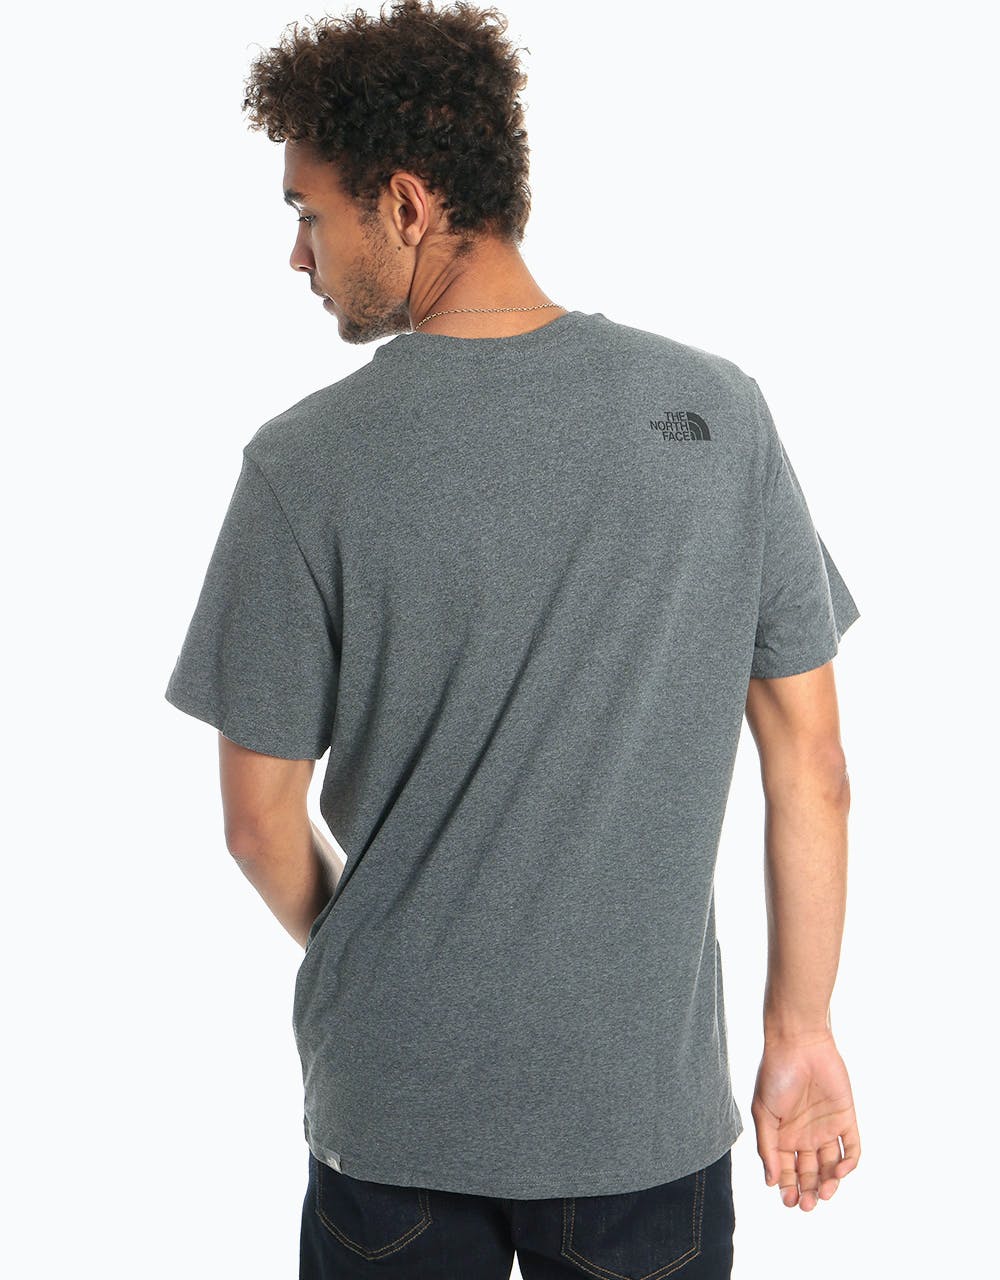 The North Face S/S Simple Dome T-Shirt - Medium Grey Heather